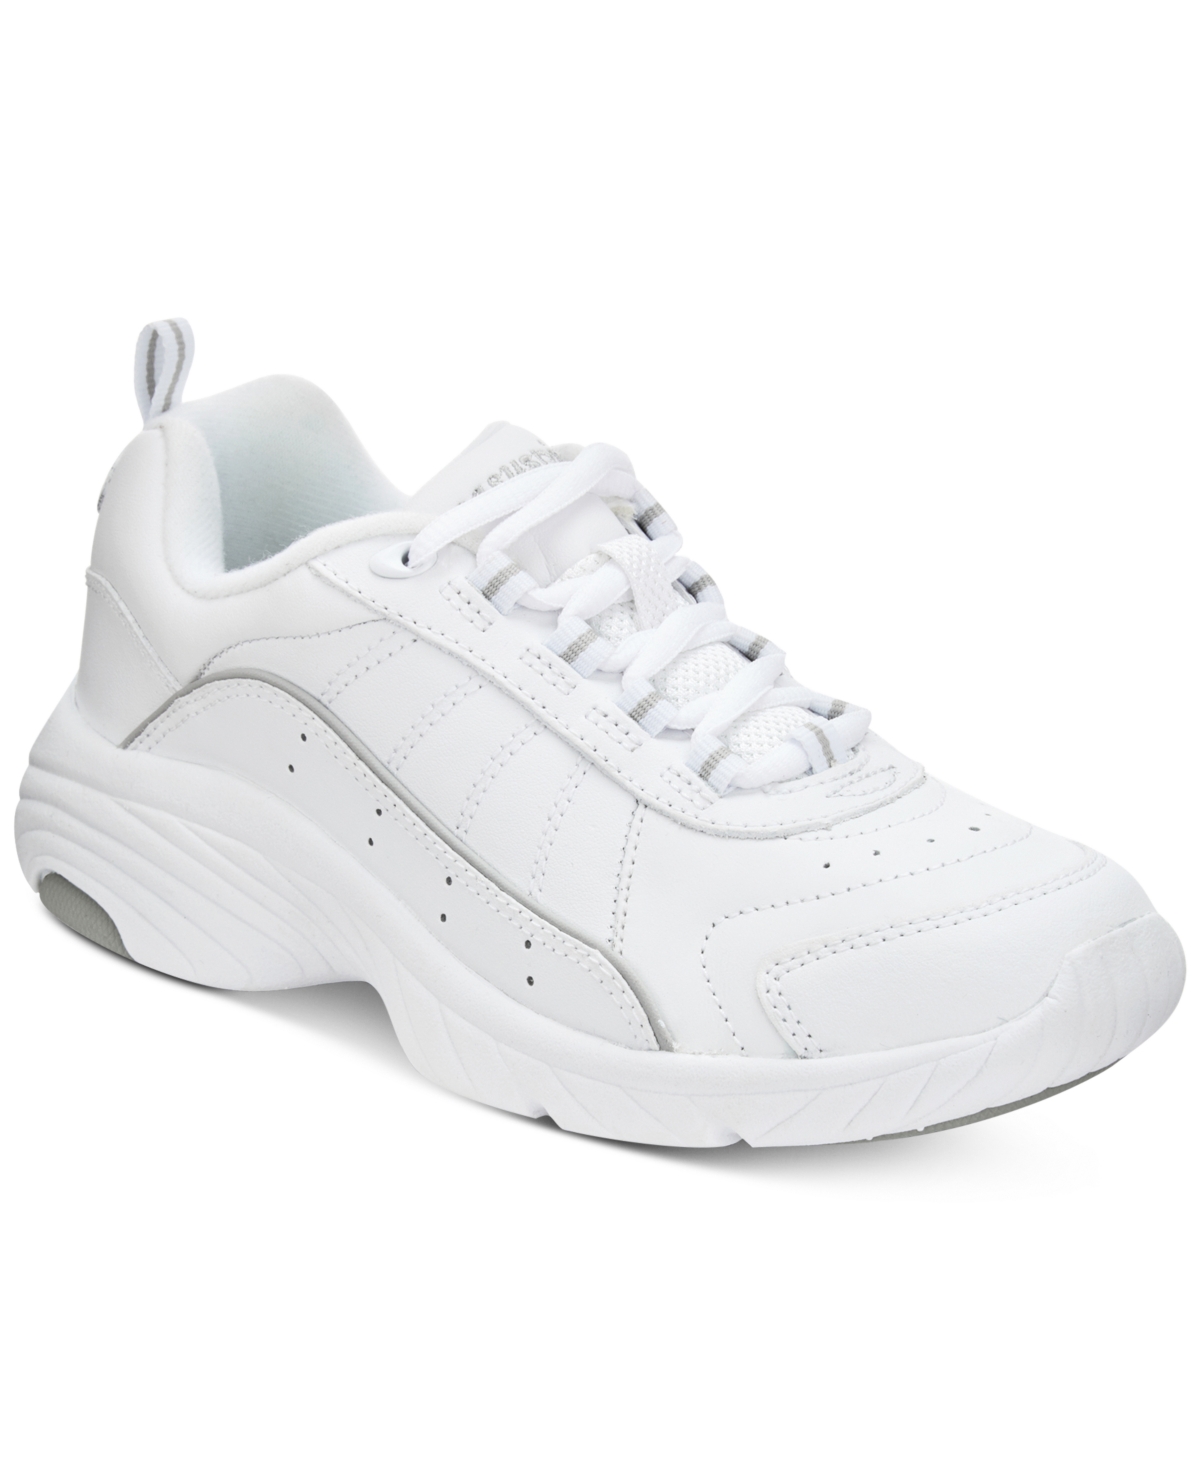 UPC 740362041463 product image for Easy Spirit Punter Sneakers Women's Shoes | upcitemdb.com